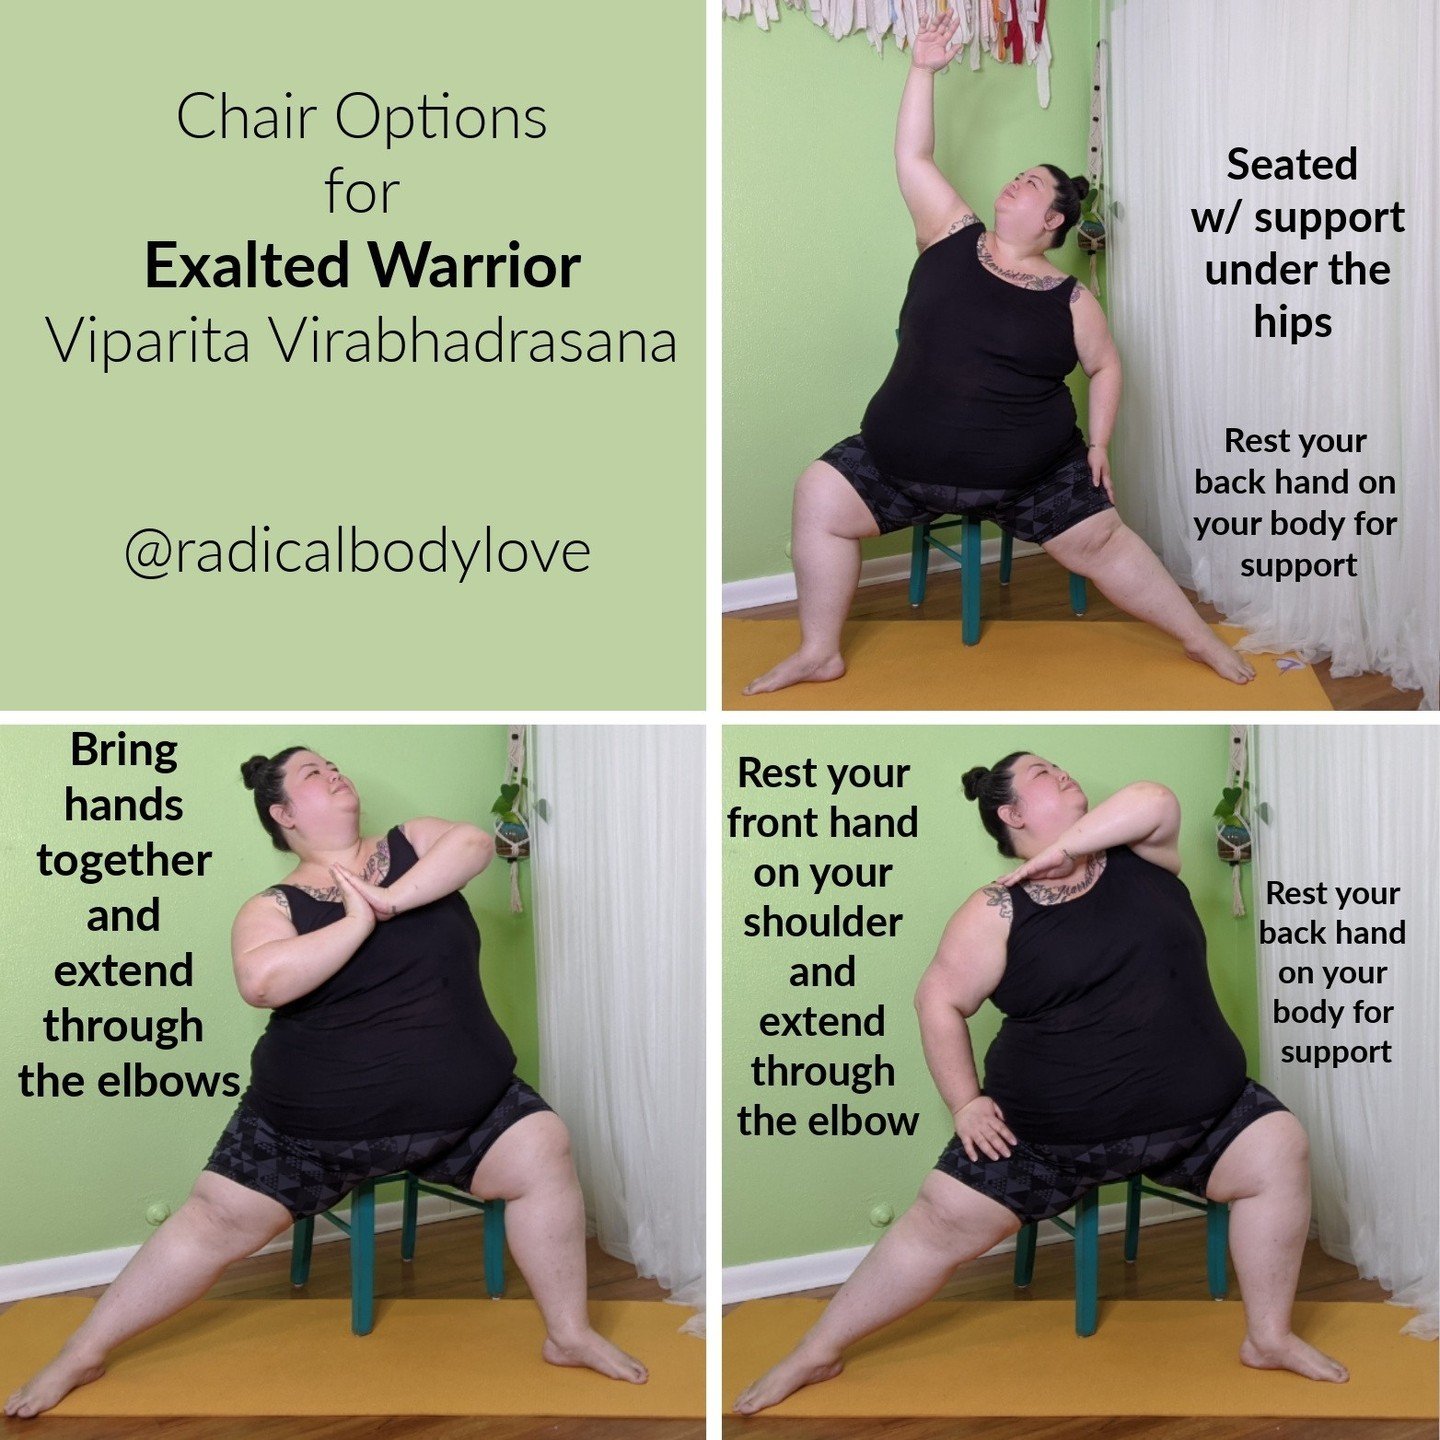 Let's explore options for Exalted Warrior together! ⁠
⁠
It is often tacked onto the practice of Warrior II, but don't let that fool you. There is plenty going on here to make you want to include the pose in your practice. ⁣⁣⁠
⁣⁣⁠
I love this asana be